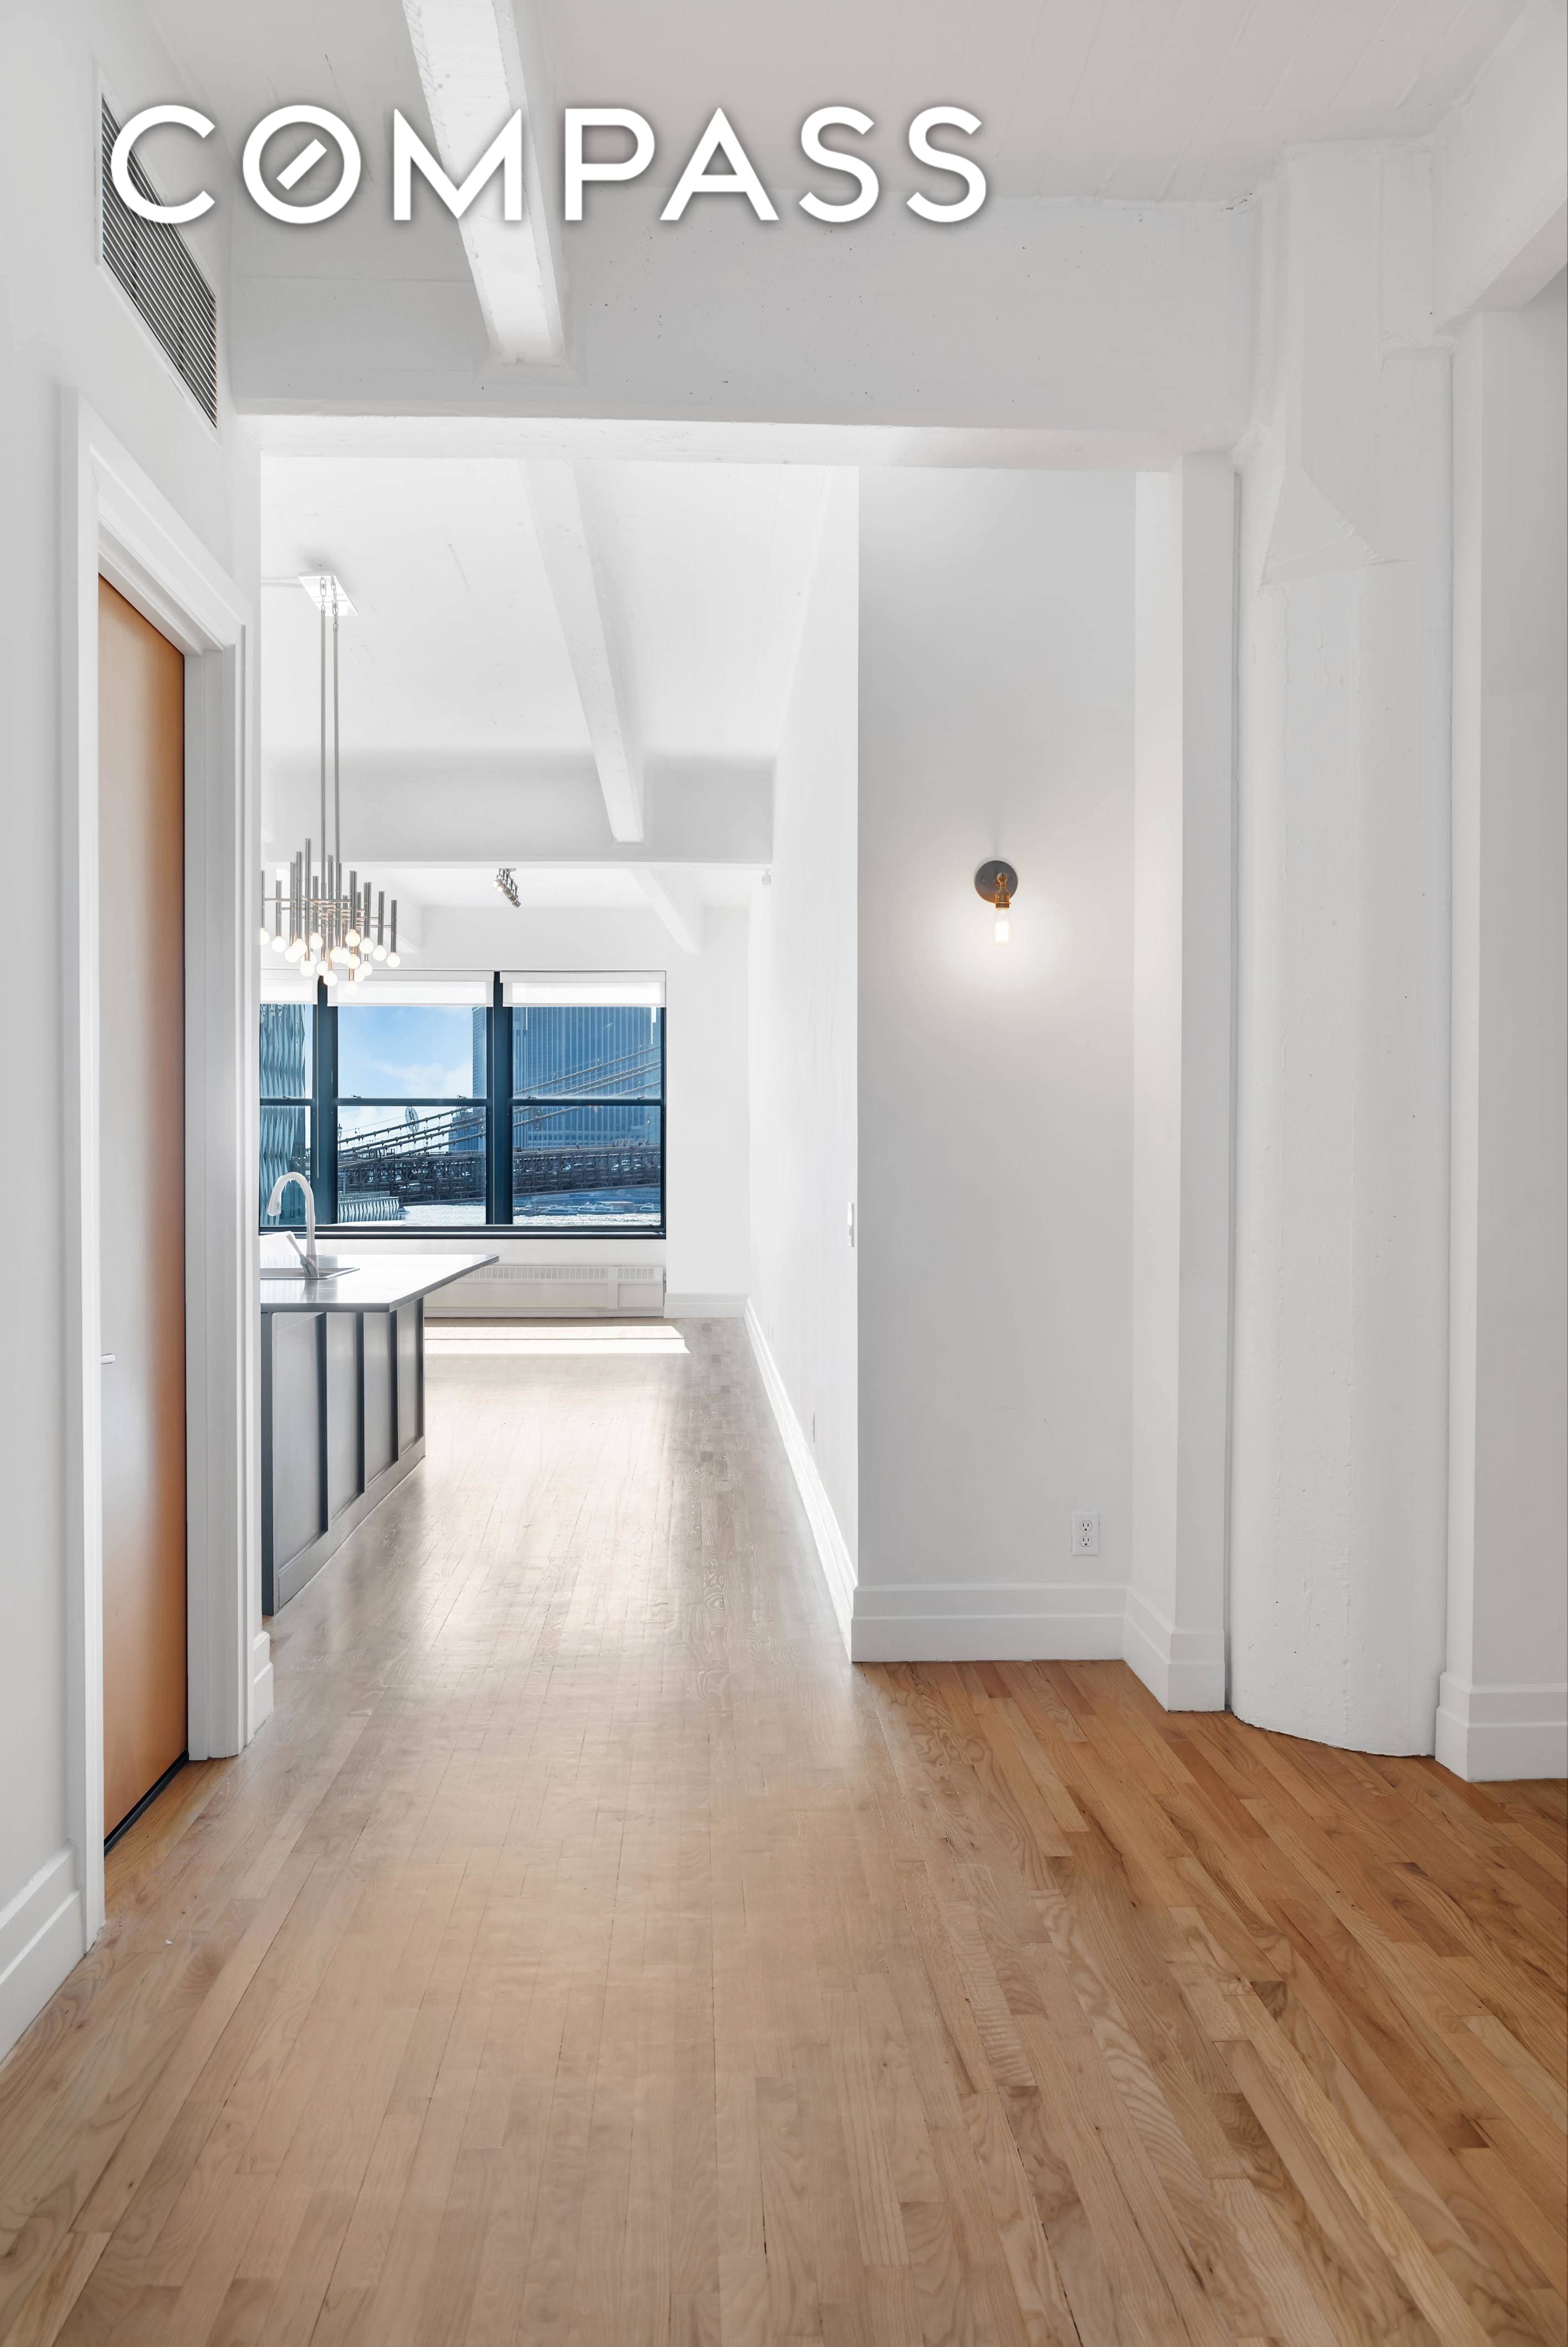 Be the first to advantage of a rare and irresistible rental opportunity in DUMBO at the iconic full service Clock Tower building, right across from Brooklyn Bridge Park !